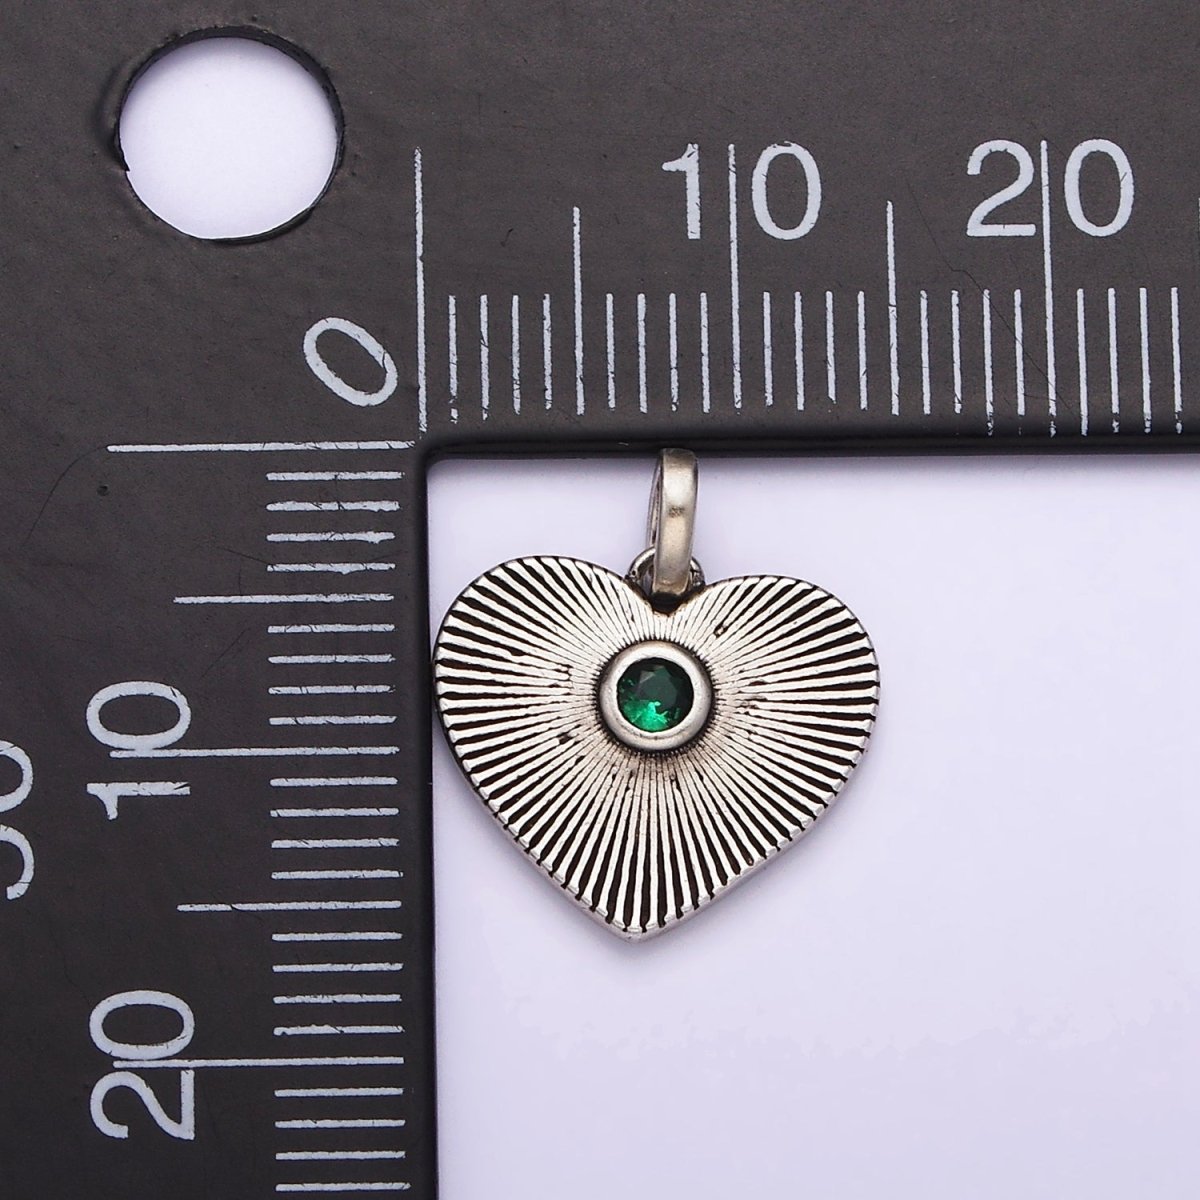 Dainty Radial Heart Charm in 925 Sterling Silver Pendant with Green Micro Pave Medallion Jewelry SL-323 - DLUXCA